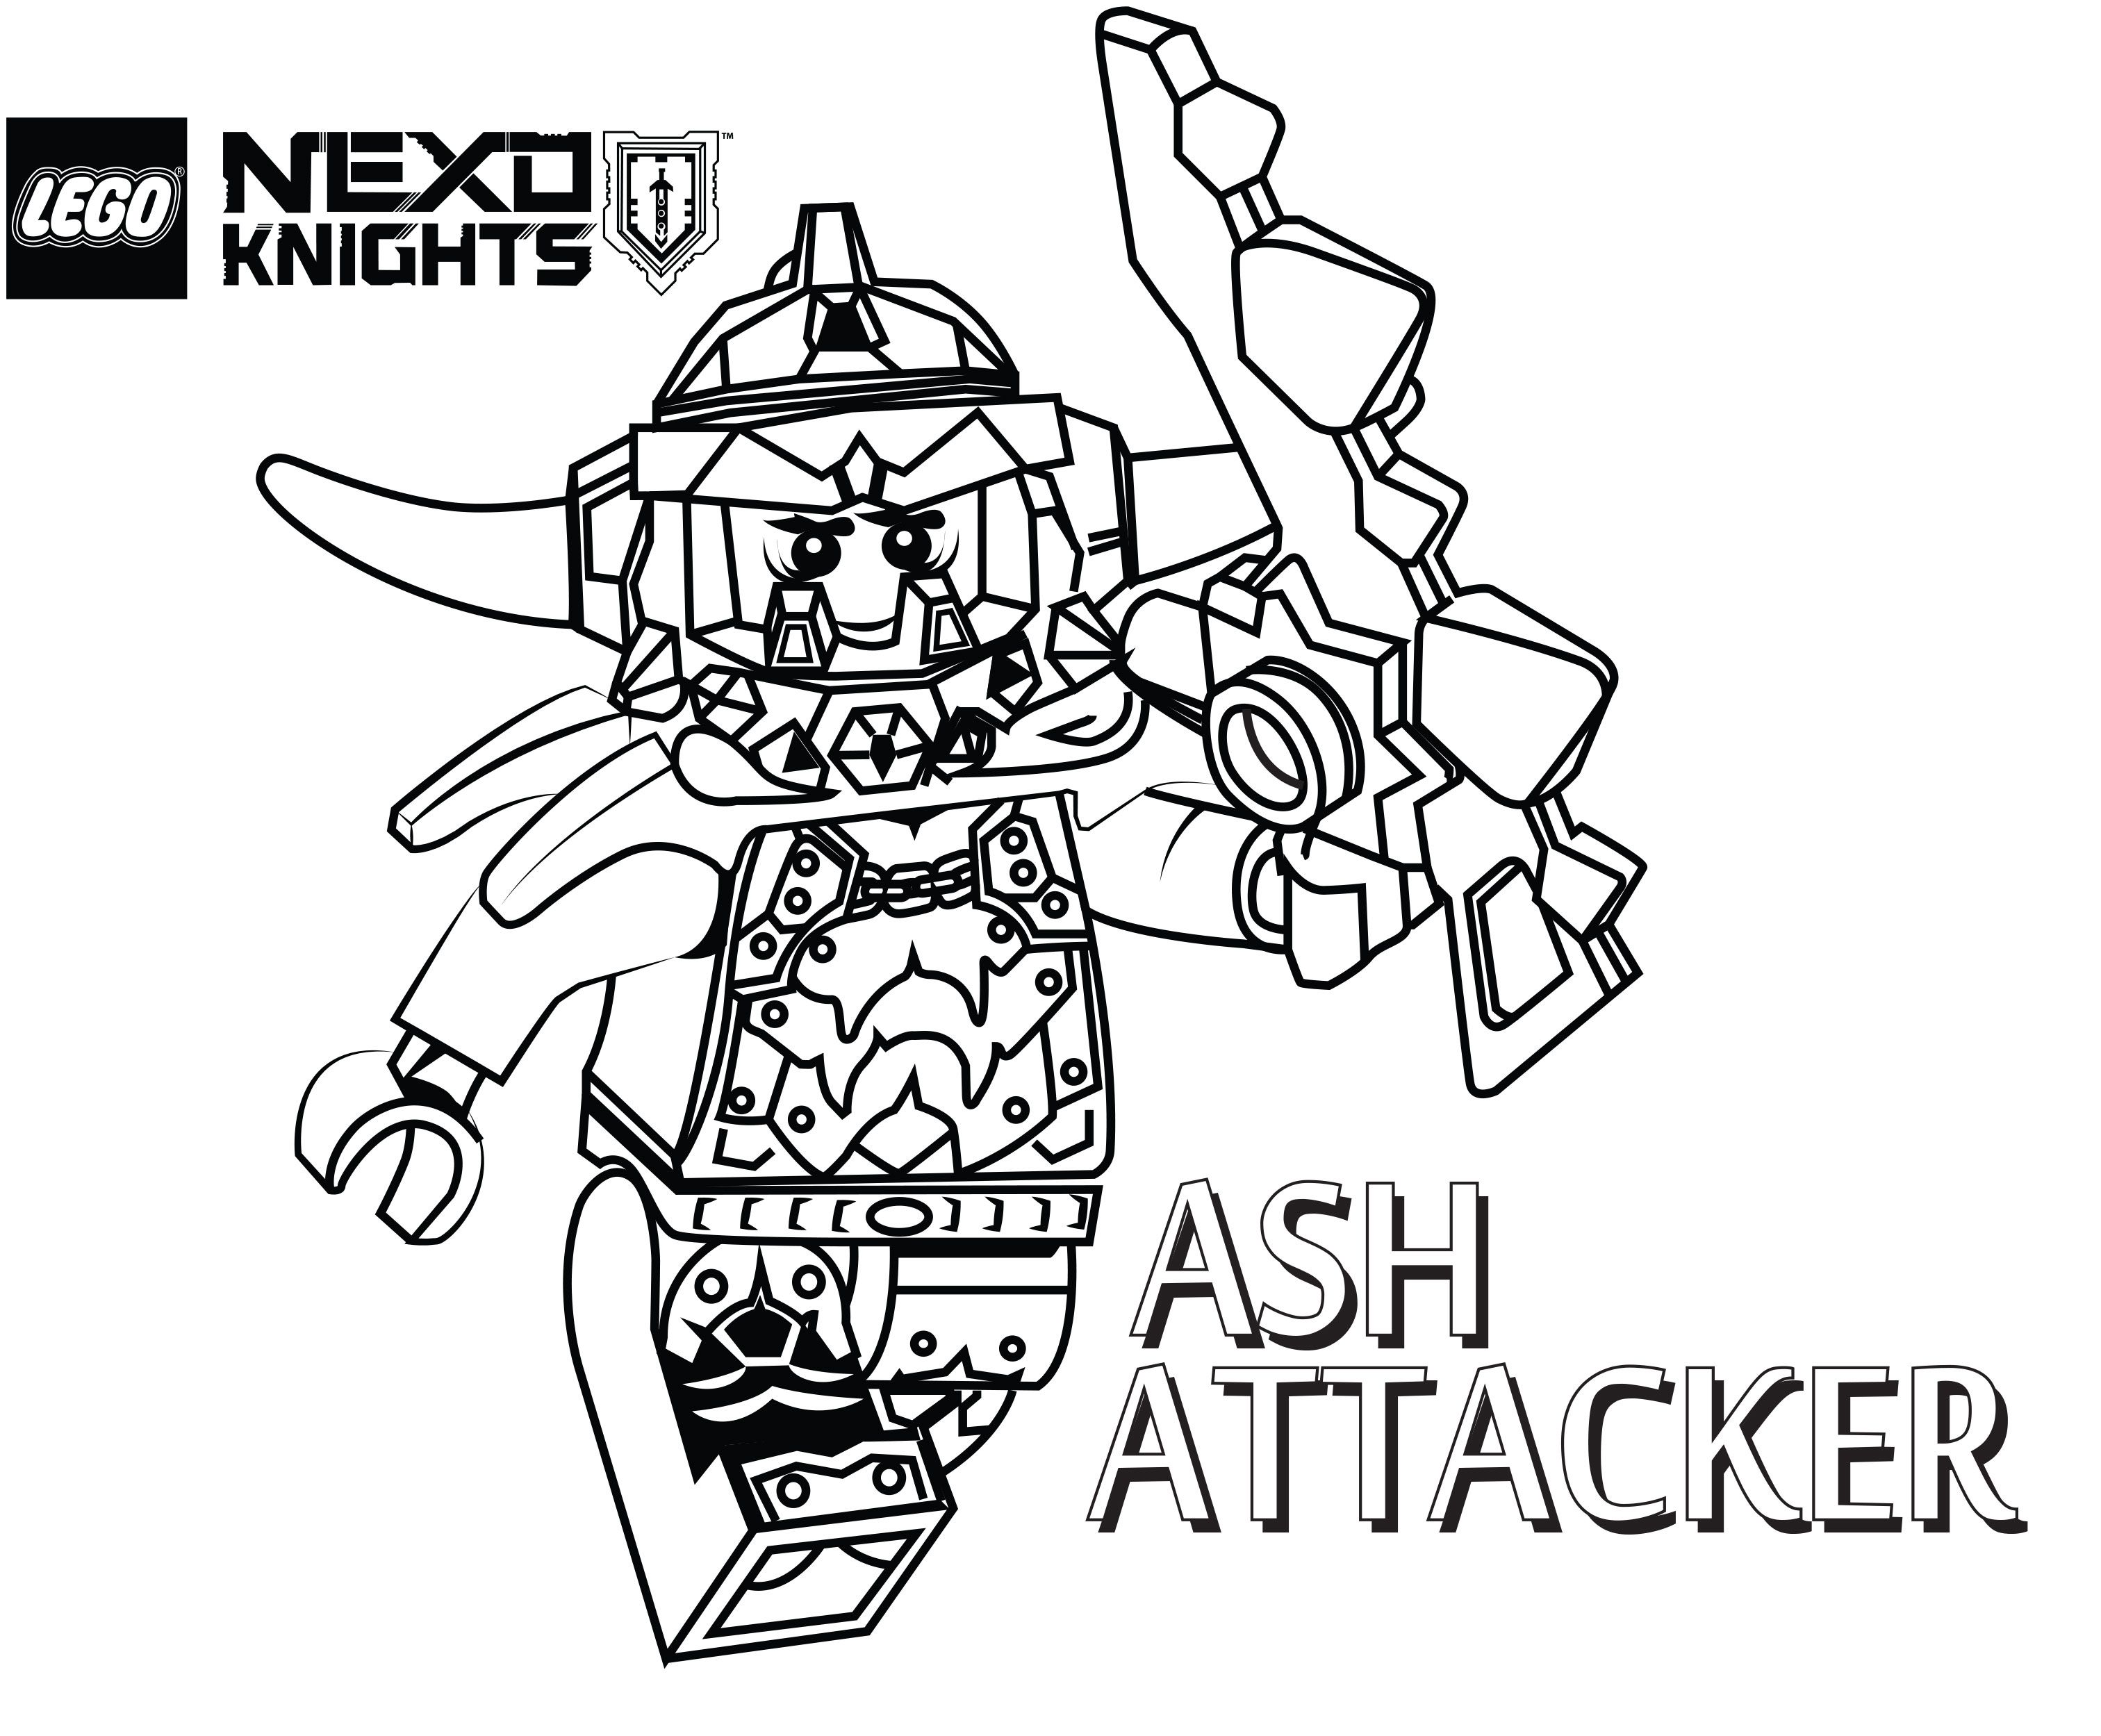 LEGO Nexo Knights Coloring Pages : Free Printable LEGO Nexo